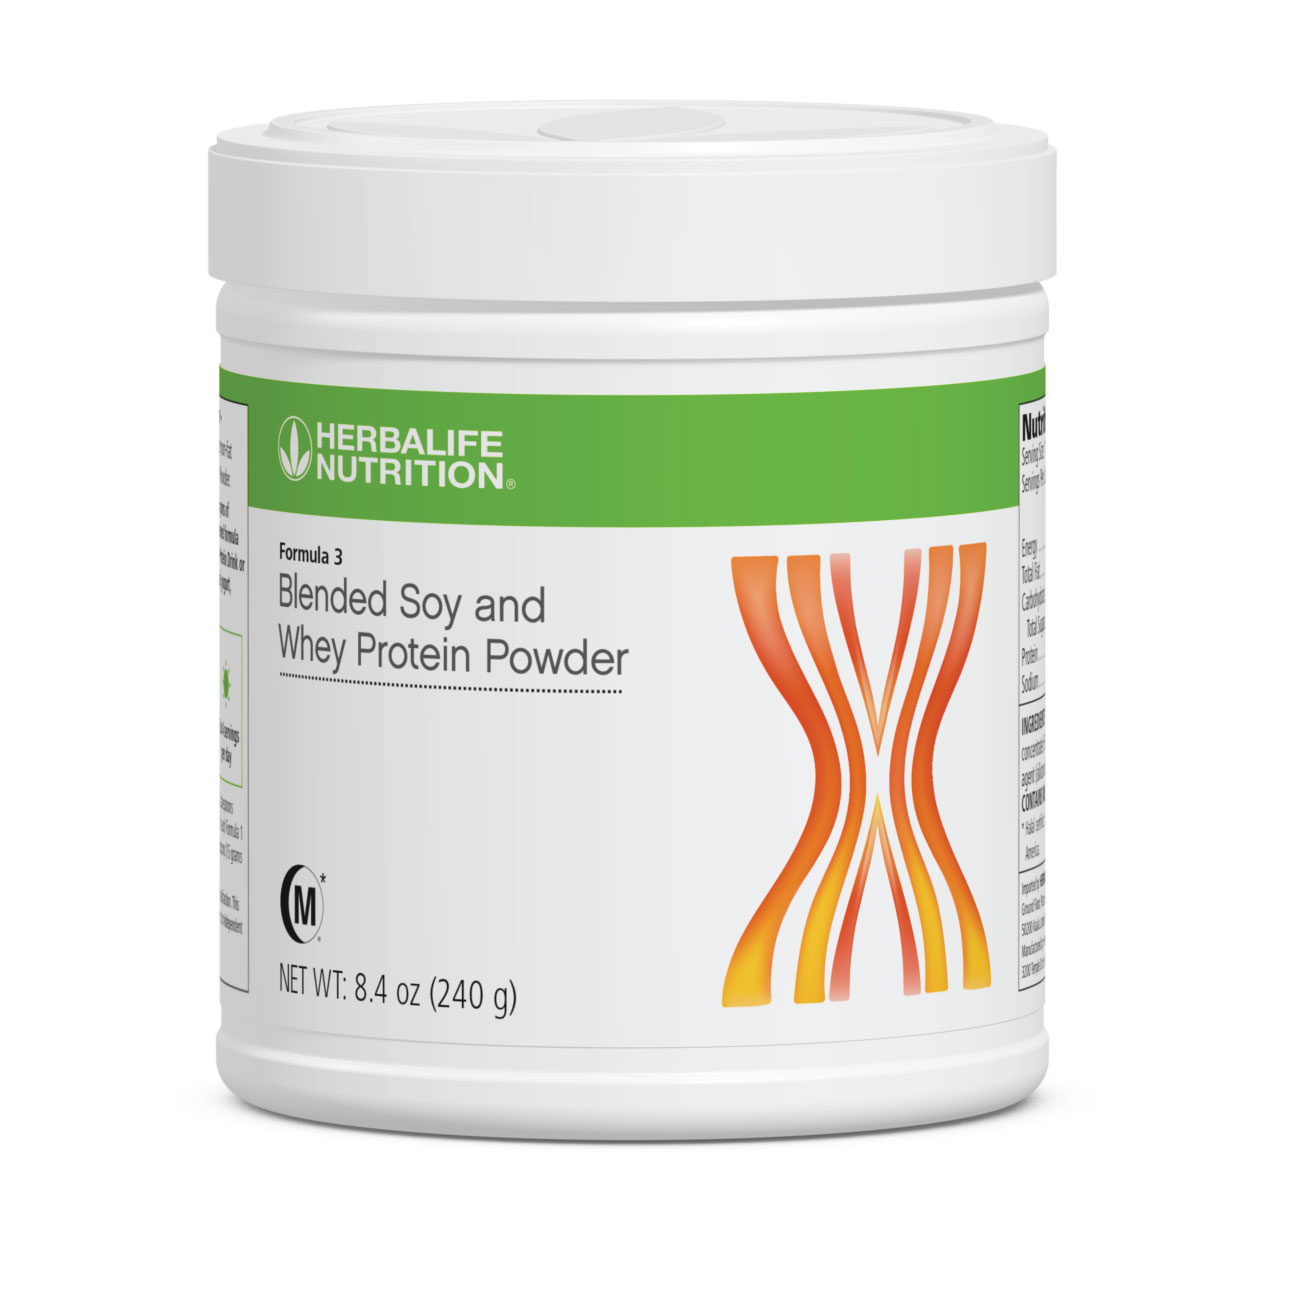 0242 formula 3 blended soy and whey protein powder 240g 